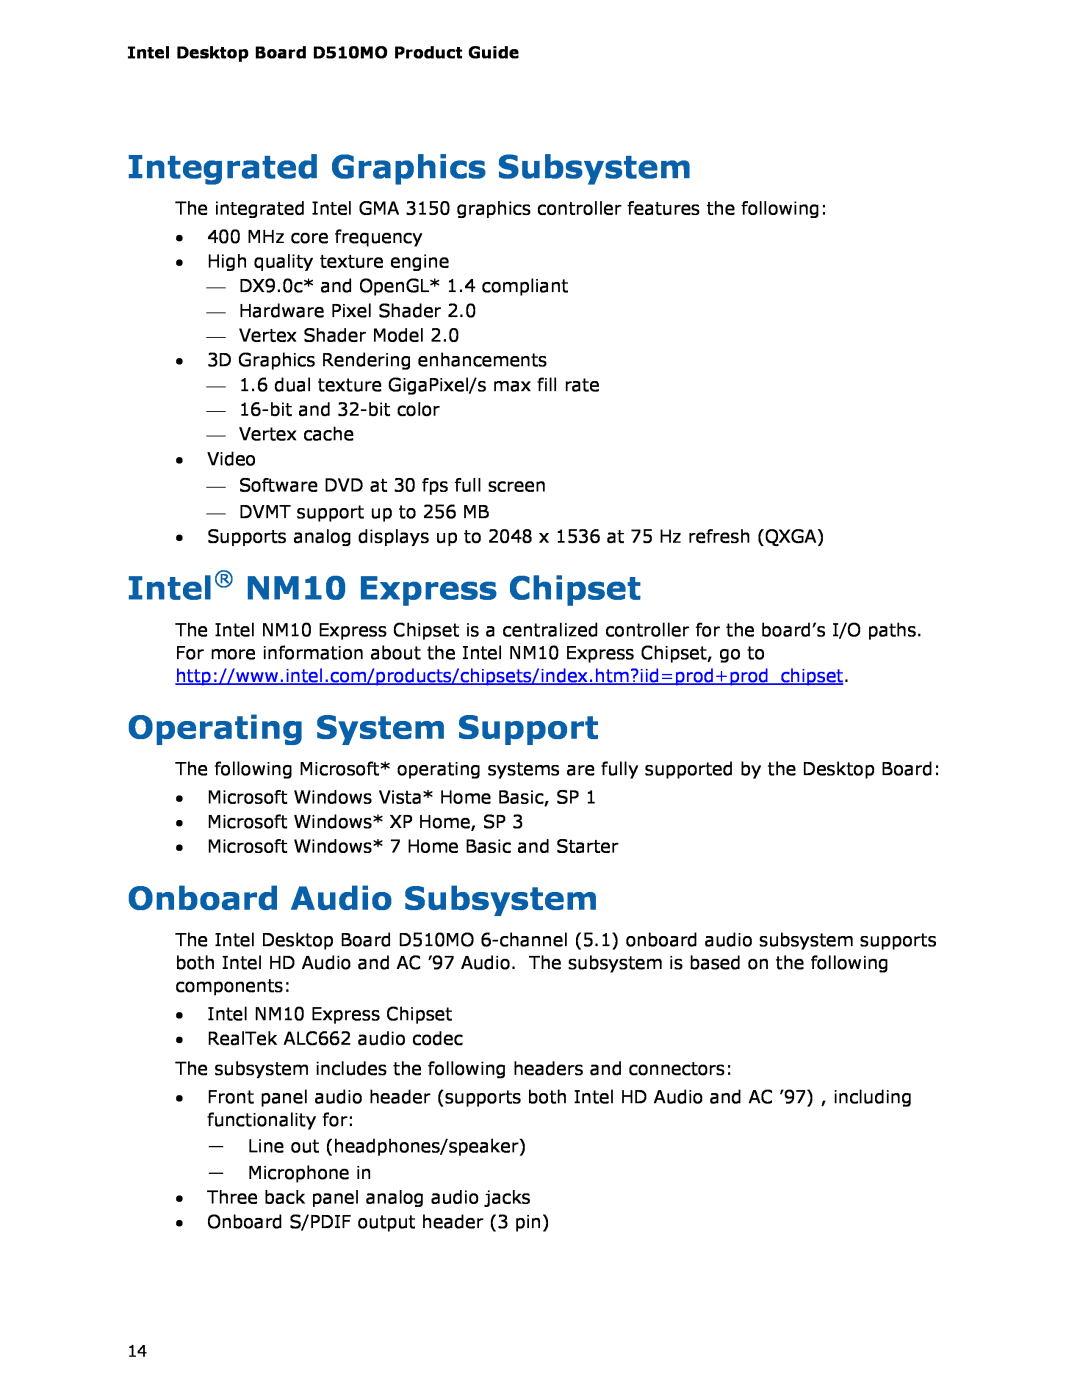 Intel D510MO Integrated Graphics Subsystem, Intel NM10 Express Chipset, Operating System Support, Onboard Audio Subsystem 